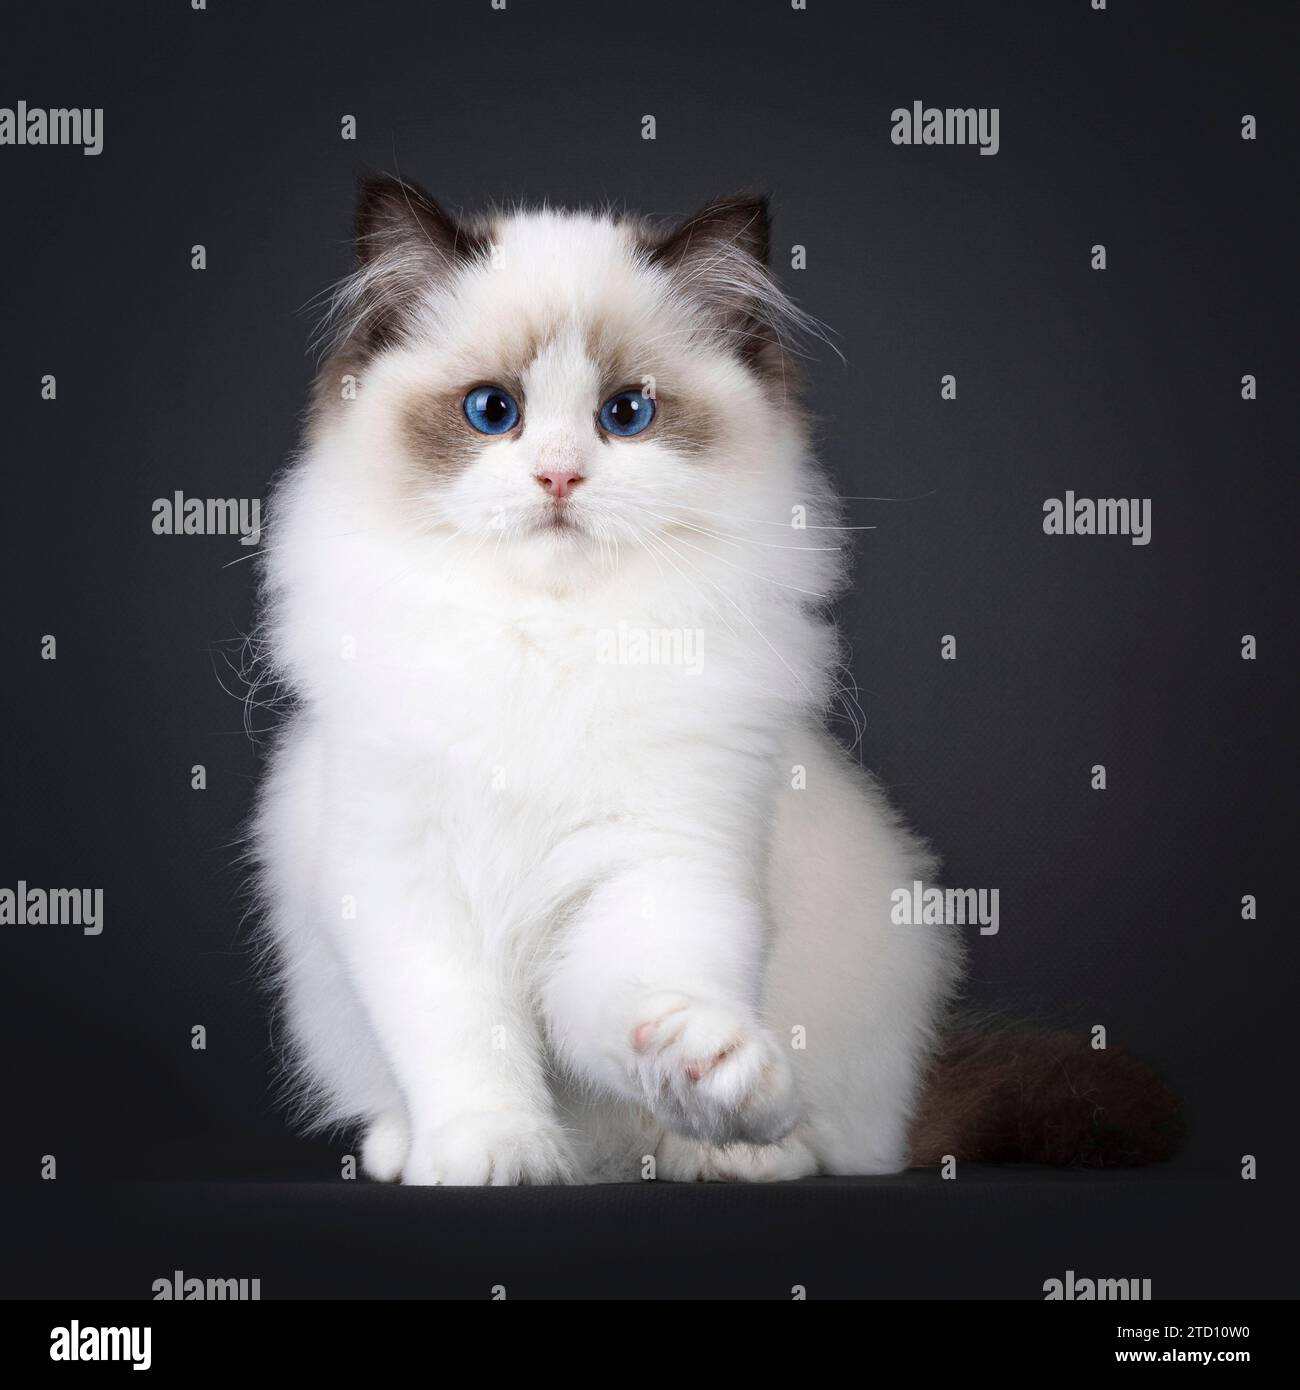 Pretty seal bicolored Ragdoll cat kitten, sitting up facing front with front paw ready to push something off surface. Looking towards camera with deep Stock Photo